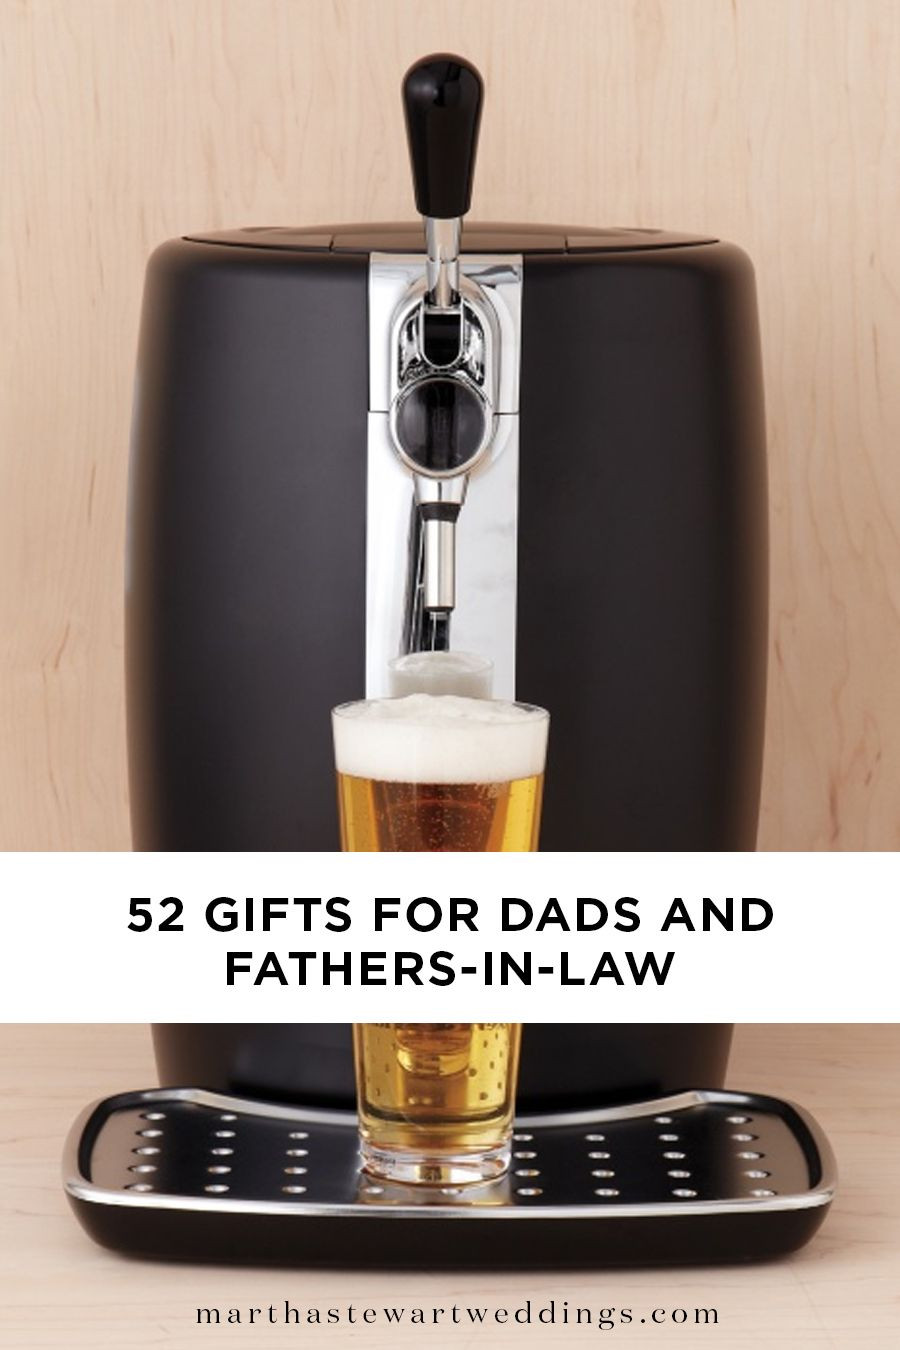 Gift Ideas Father In Law
 27 Gifts for Dads and Fathers in Law